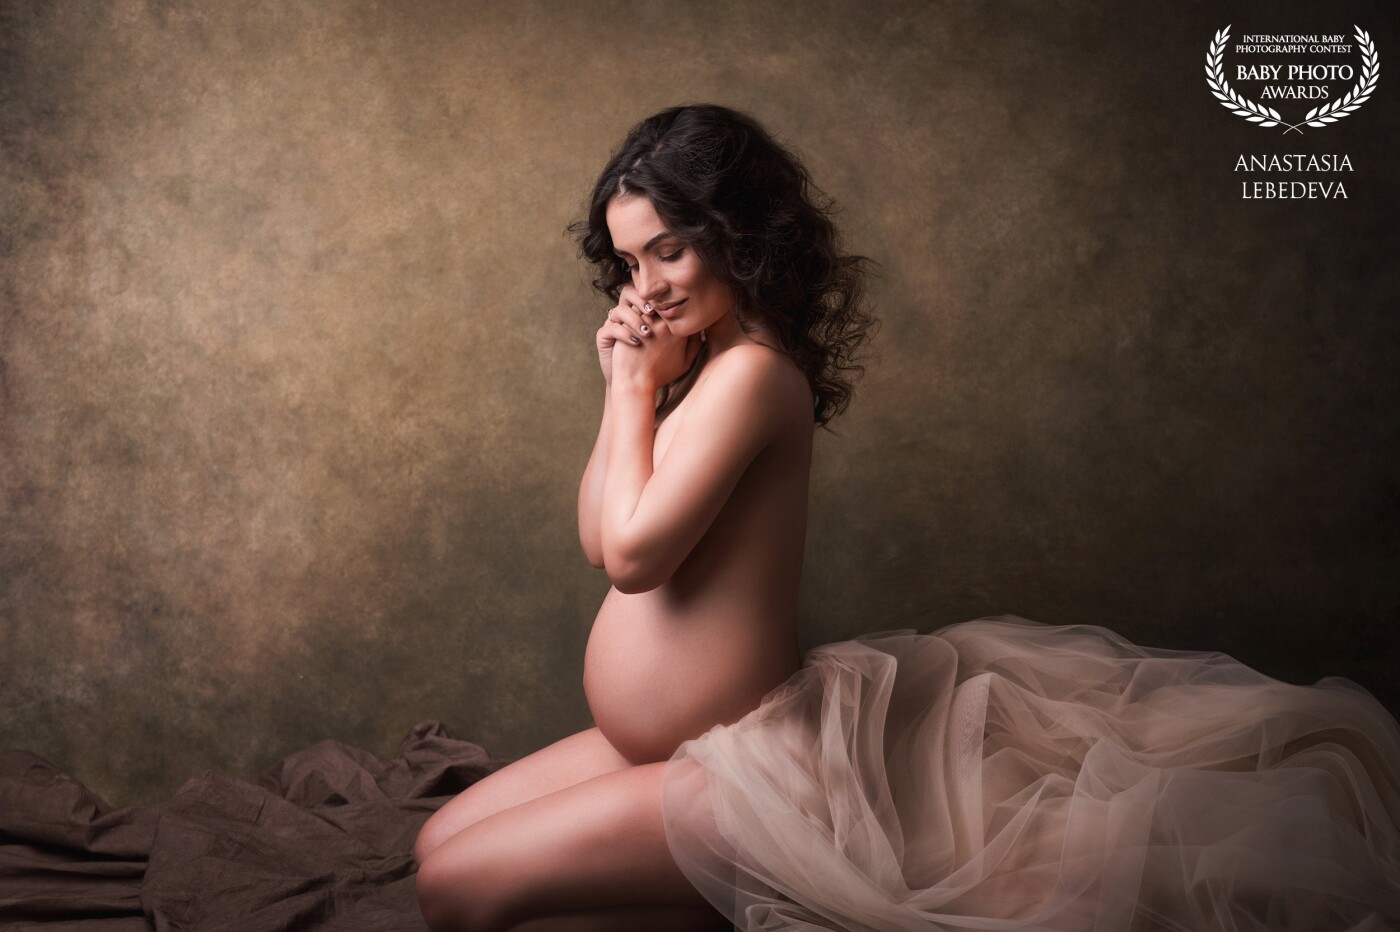 When I look at this photo, I have an aesthetic orgasm! This is harmony and beauty, this is tenderness and sensuality. I really love taking pictures of pregnancy! Women in this position are the most sensual and beautiful! What could be better than giving a new life in love!